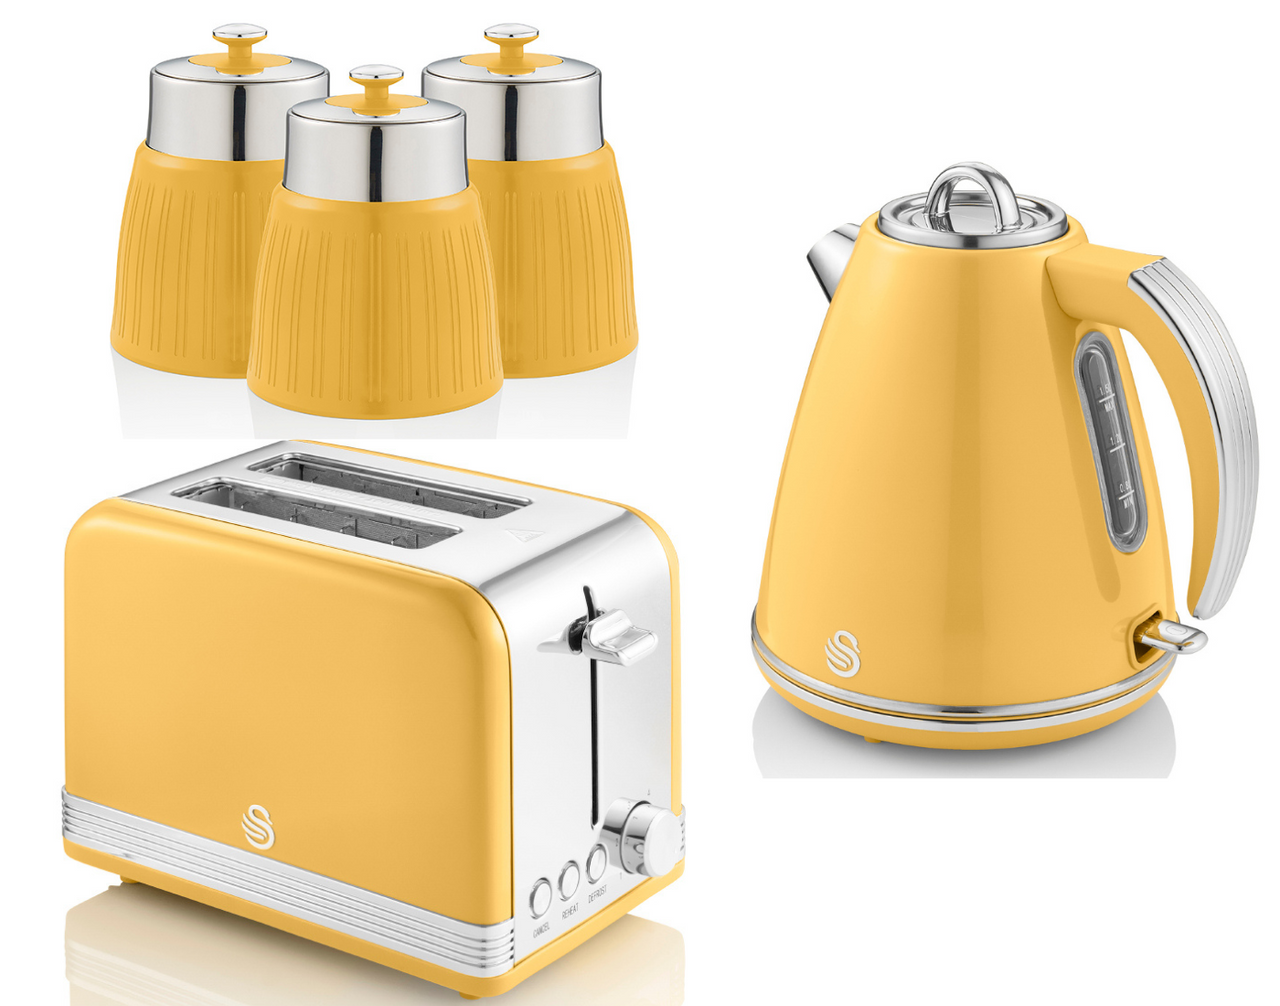 Swan Retro Yellow Jug Kettle 2 Slice Toaster & 3 Storage Canisters Kitchen Set